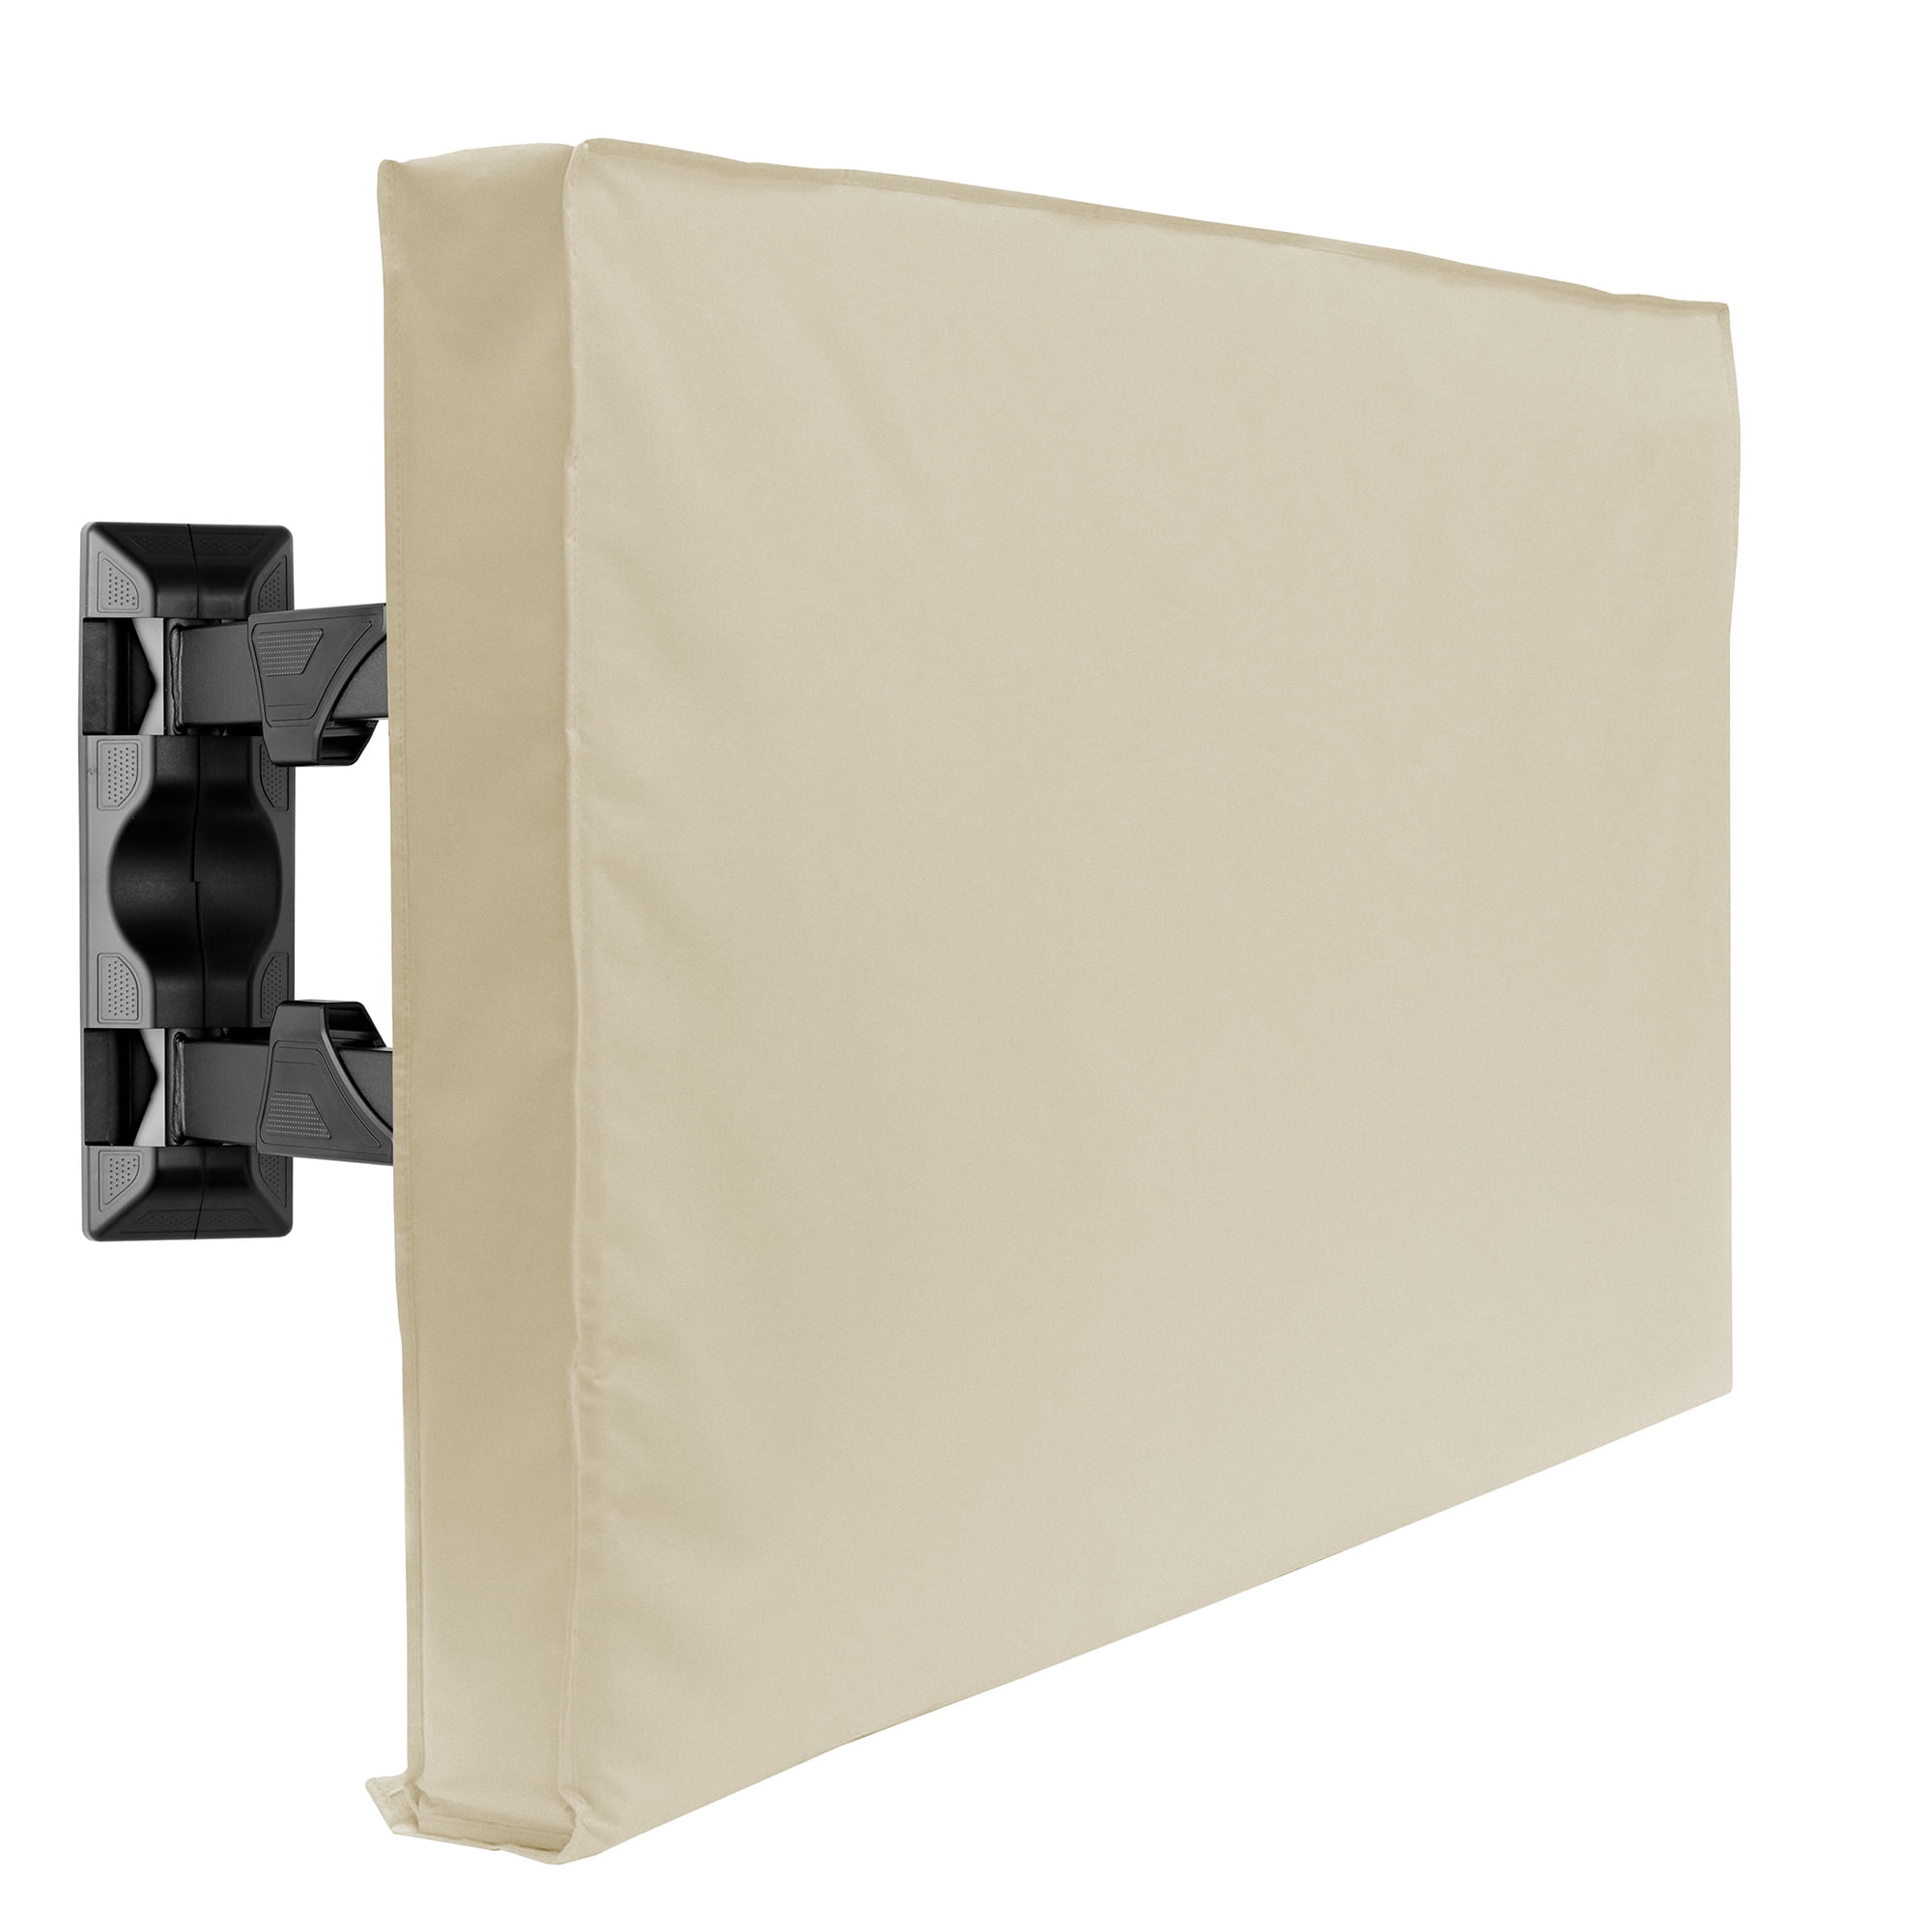 Outdoor Waterproof and Weatherproof TV Cover for 44 to 46 inch Outside Flat Screen TV Beige 